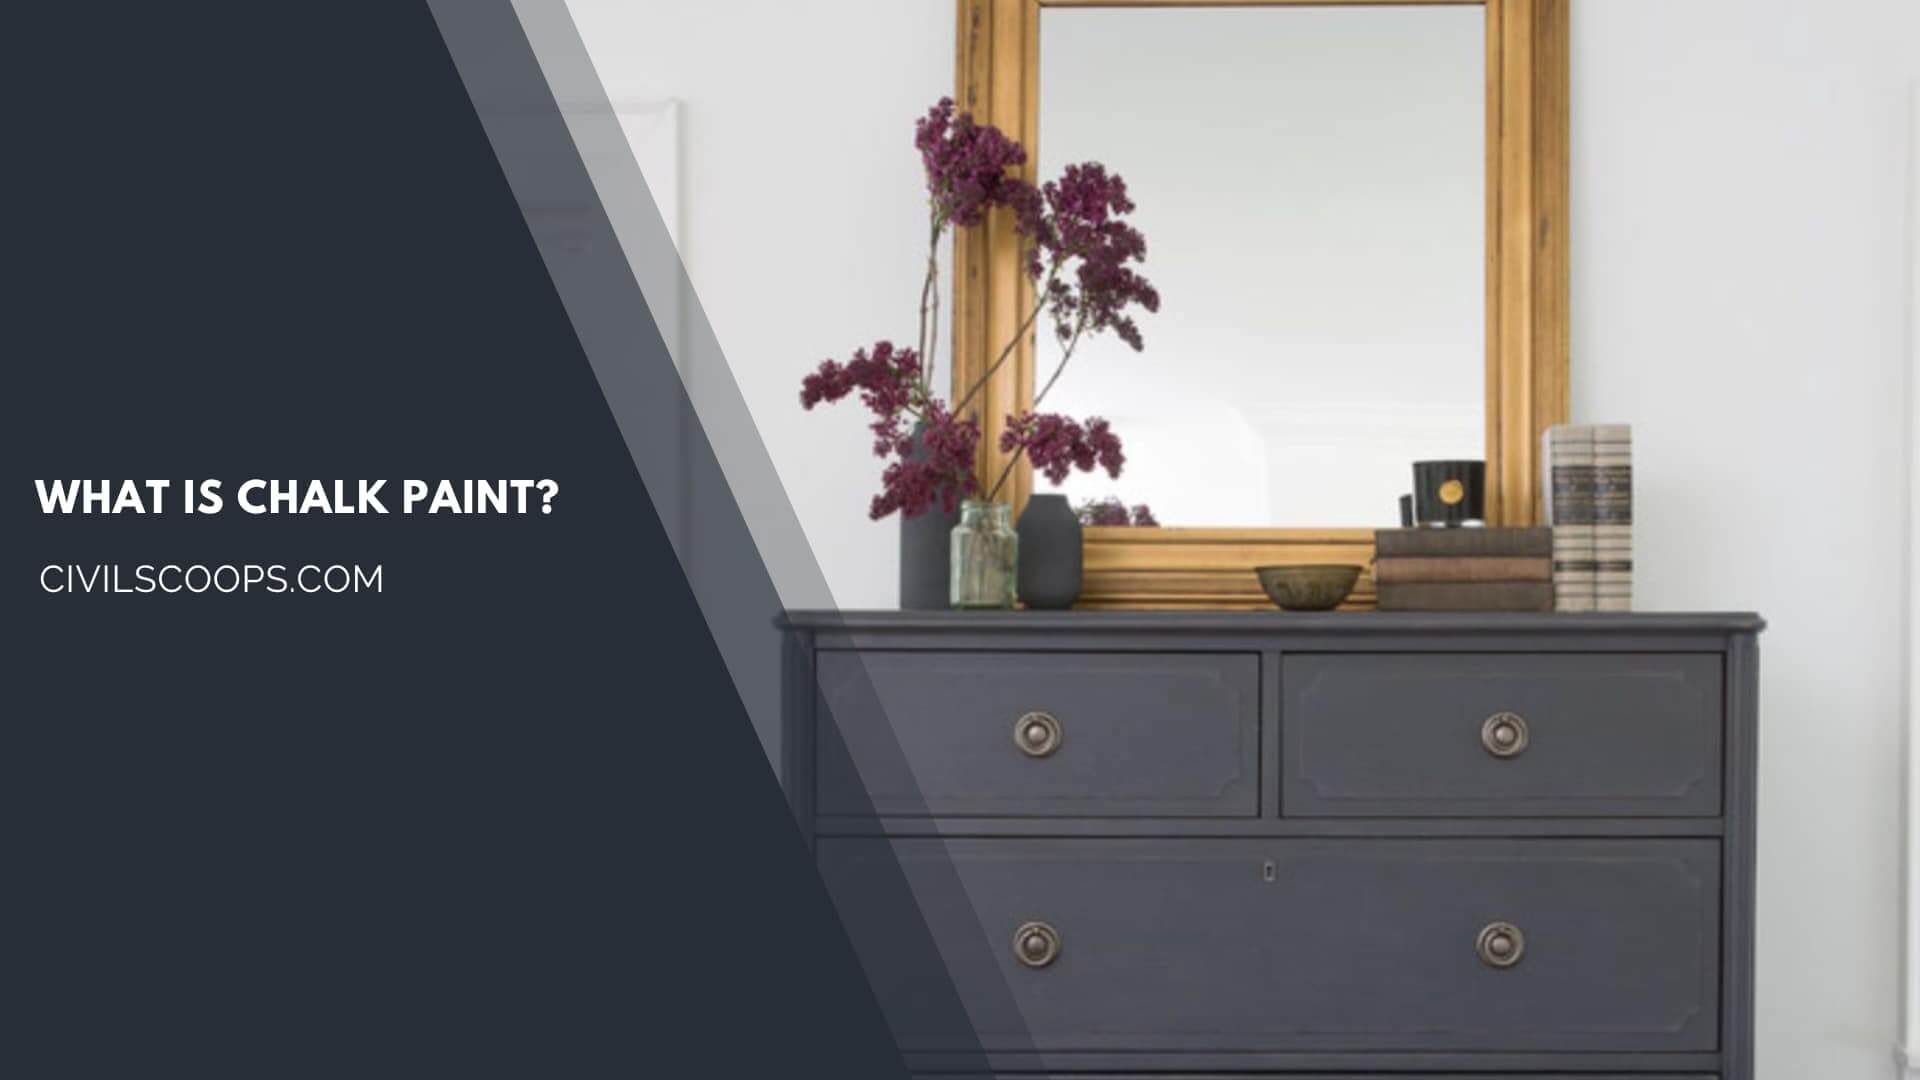 What Is Chalk Paint?